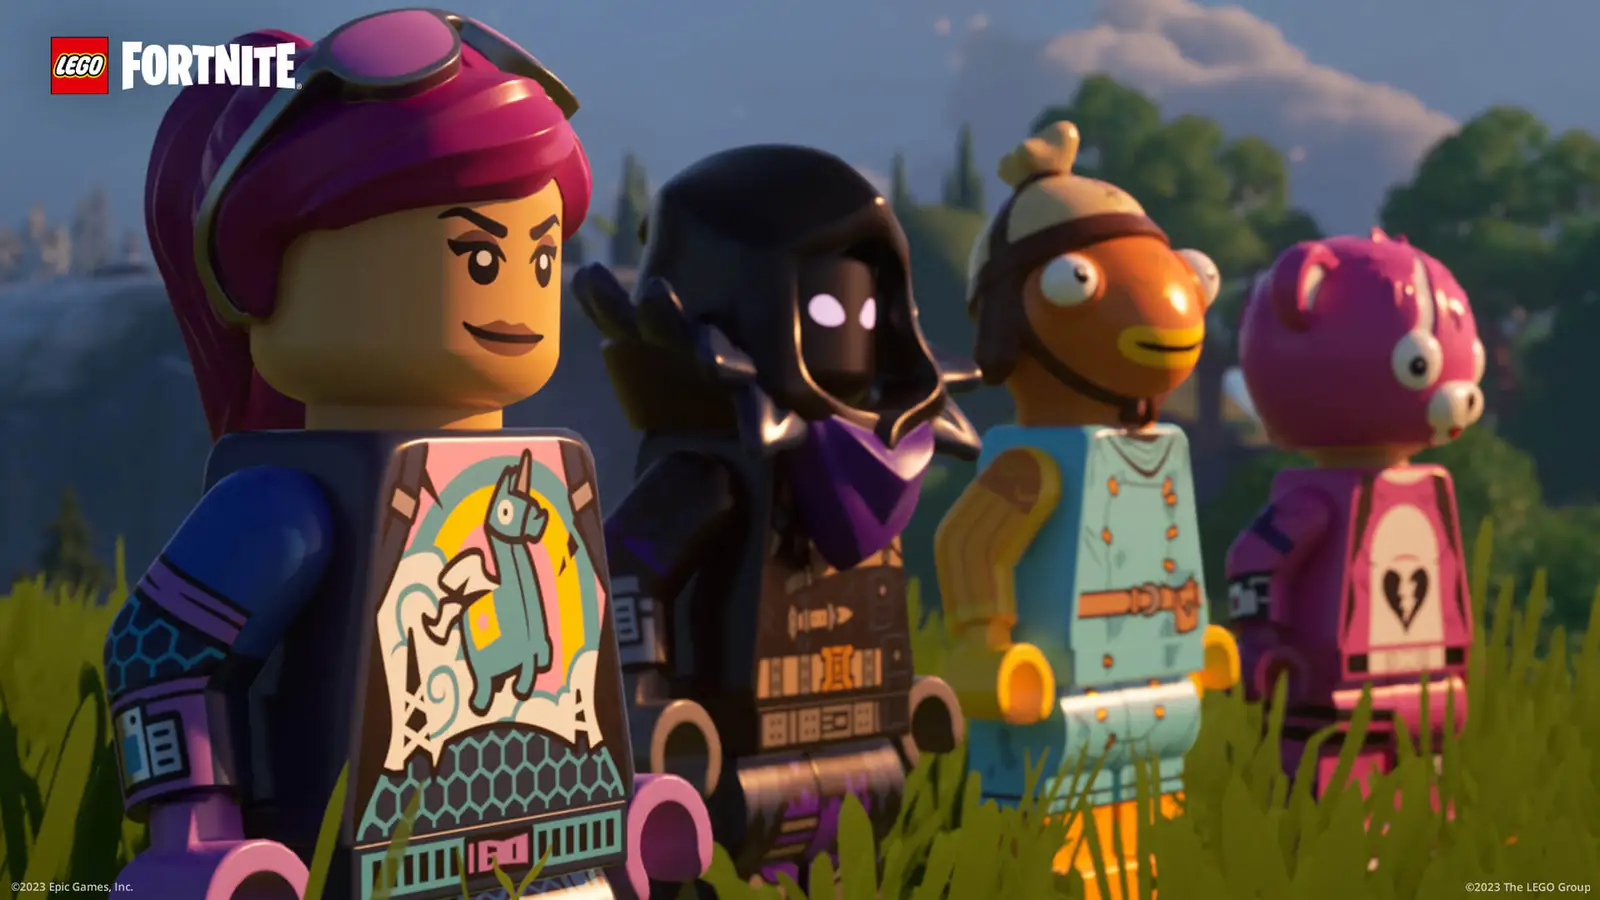 LEGO Fortnite: Villagers not able to open doors? Here’s what you can do